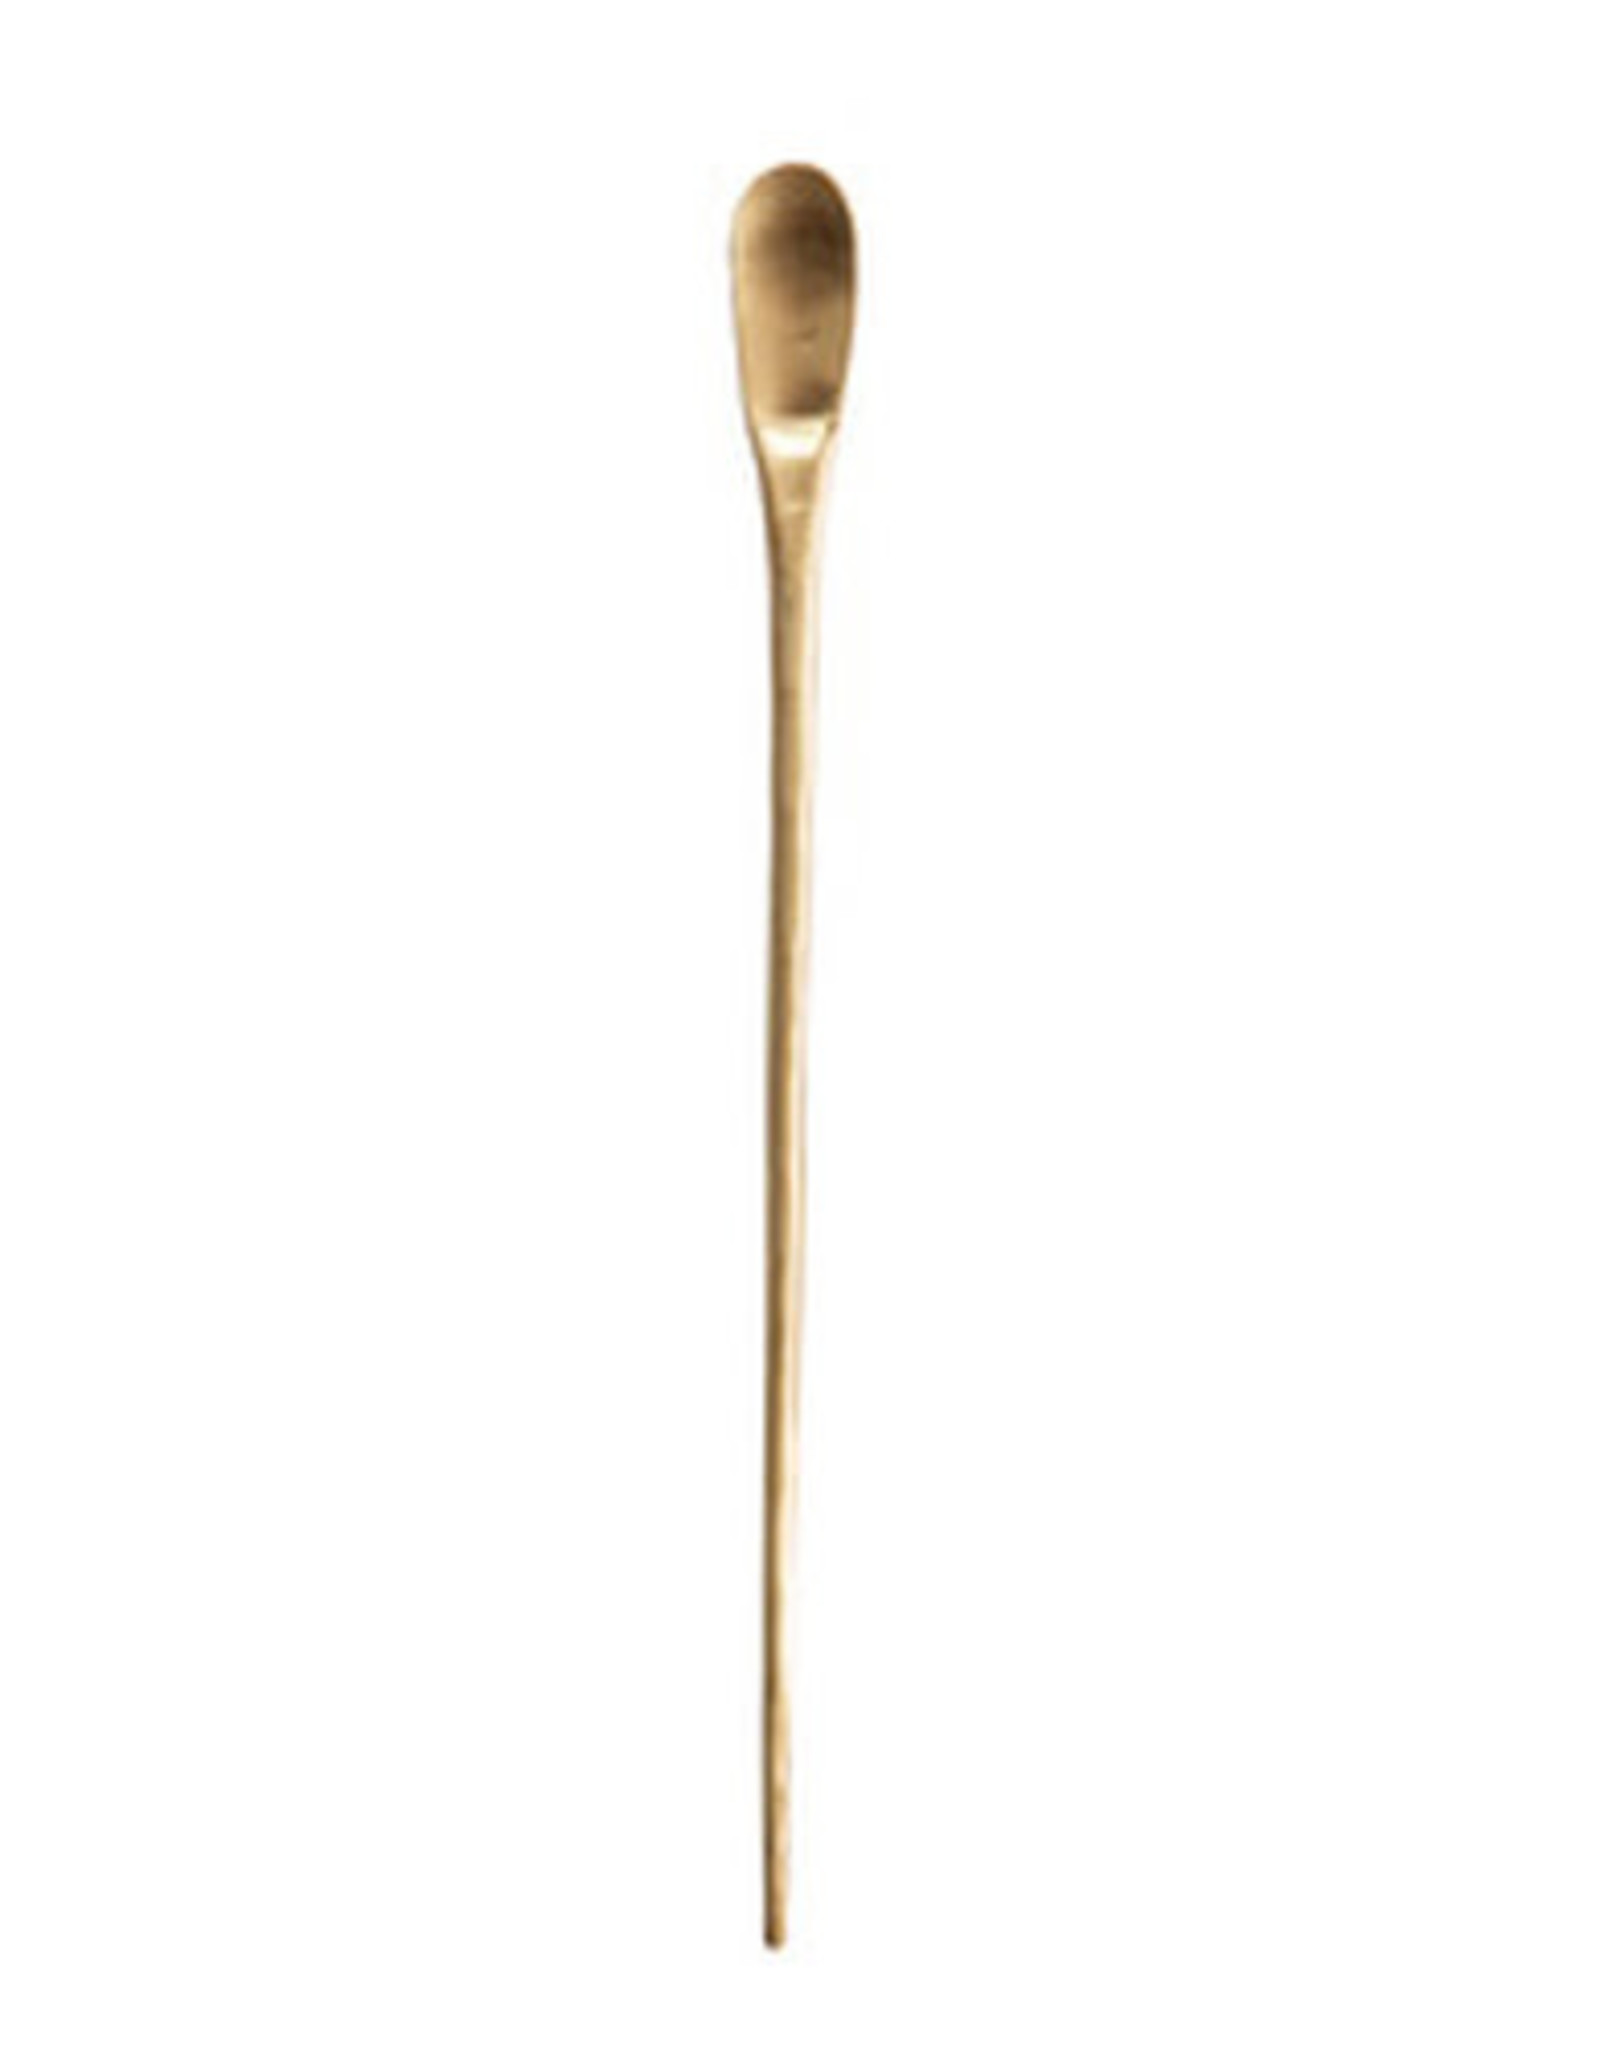 9" Brass Cocktail Spoon